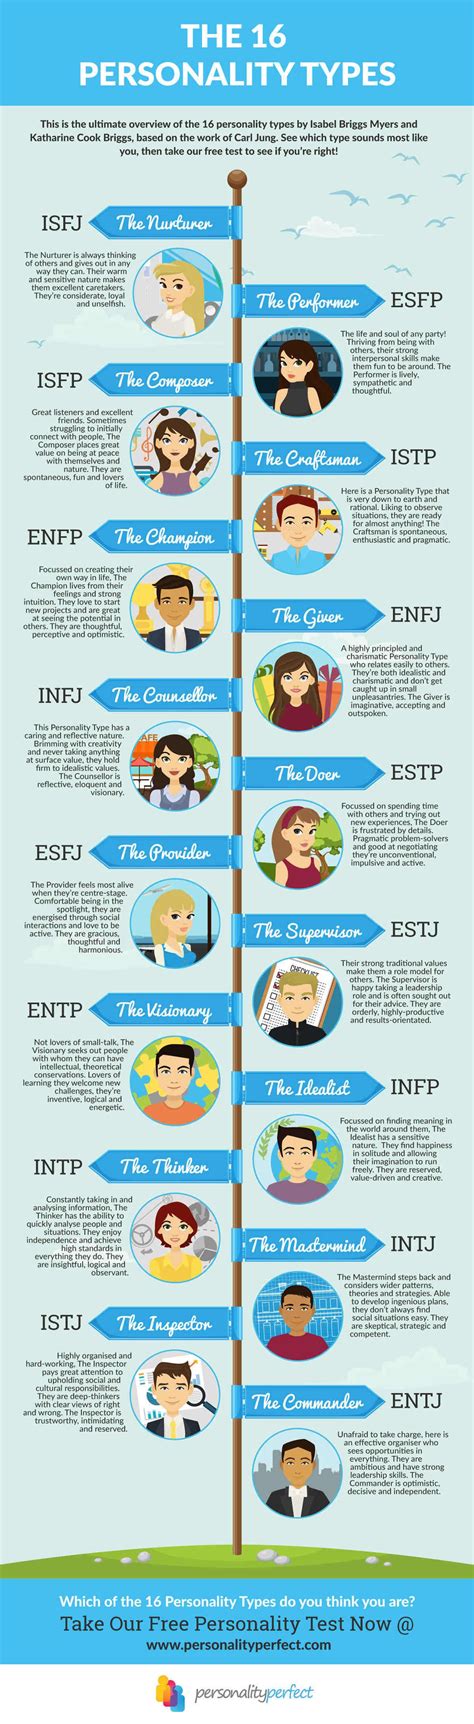 Myers Briggs 16 Personality Types Overview Whats Your Type Find Out